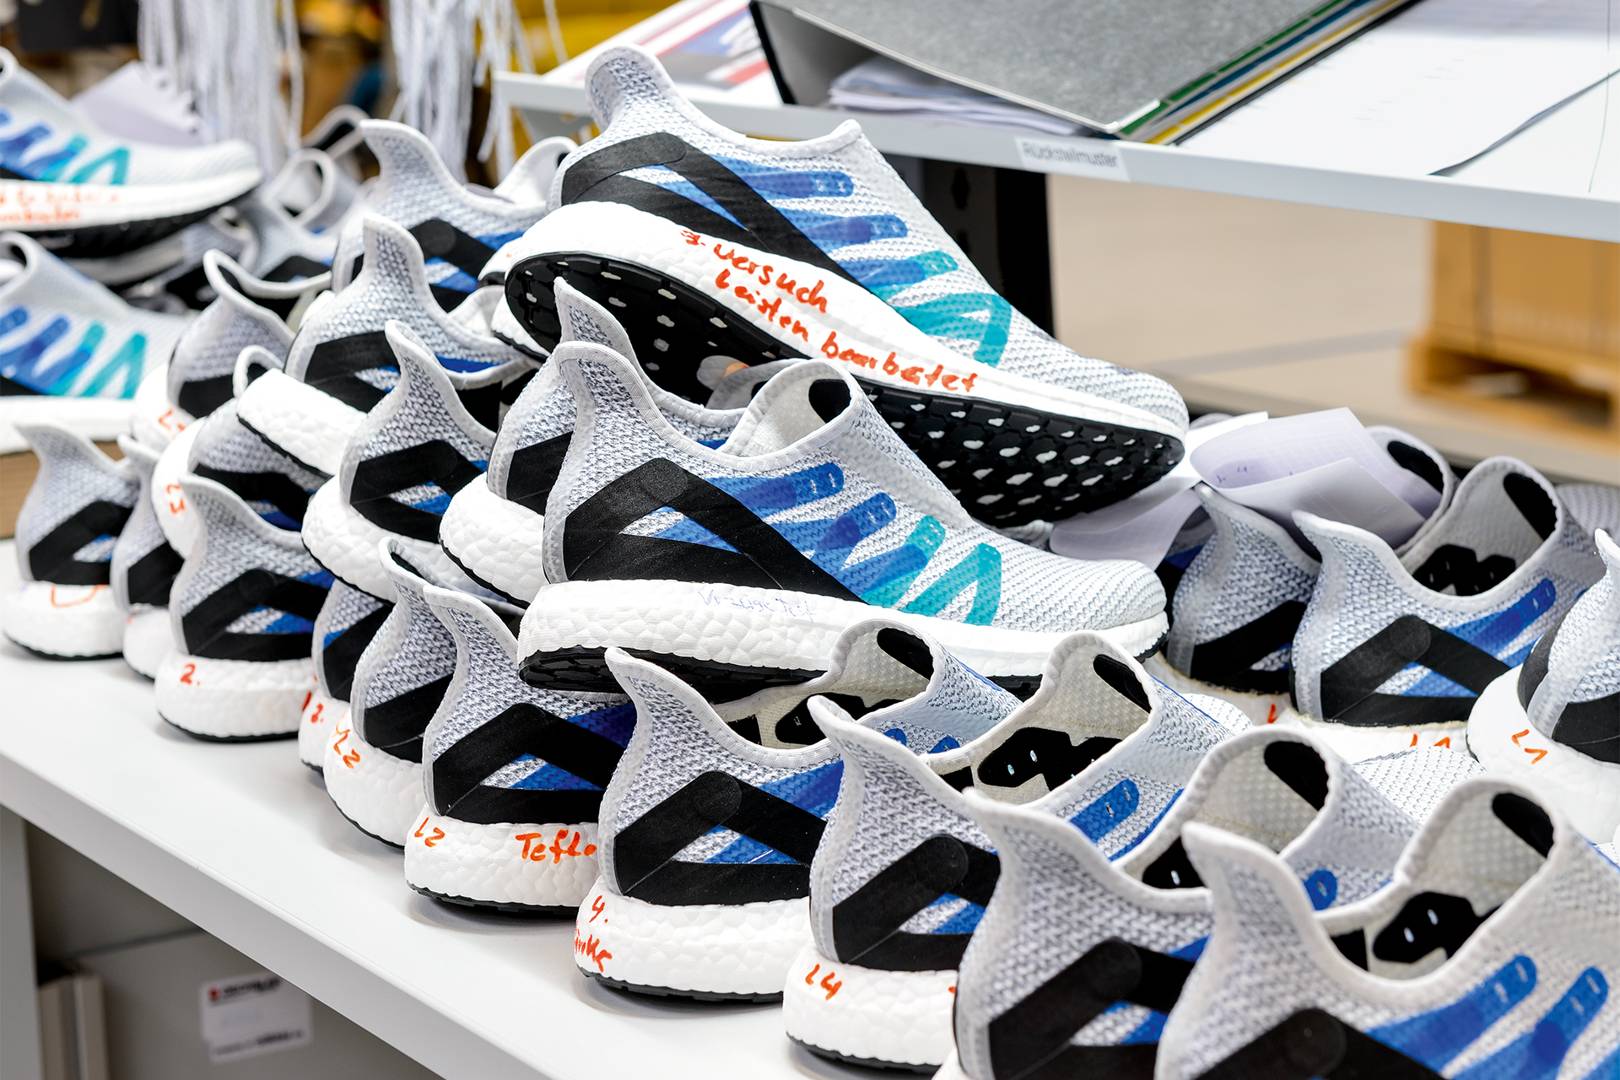 To make a new kind of shoe, adidas had 